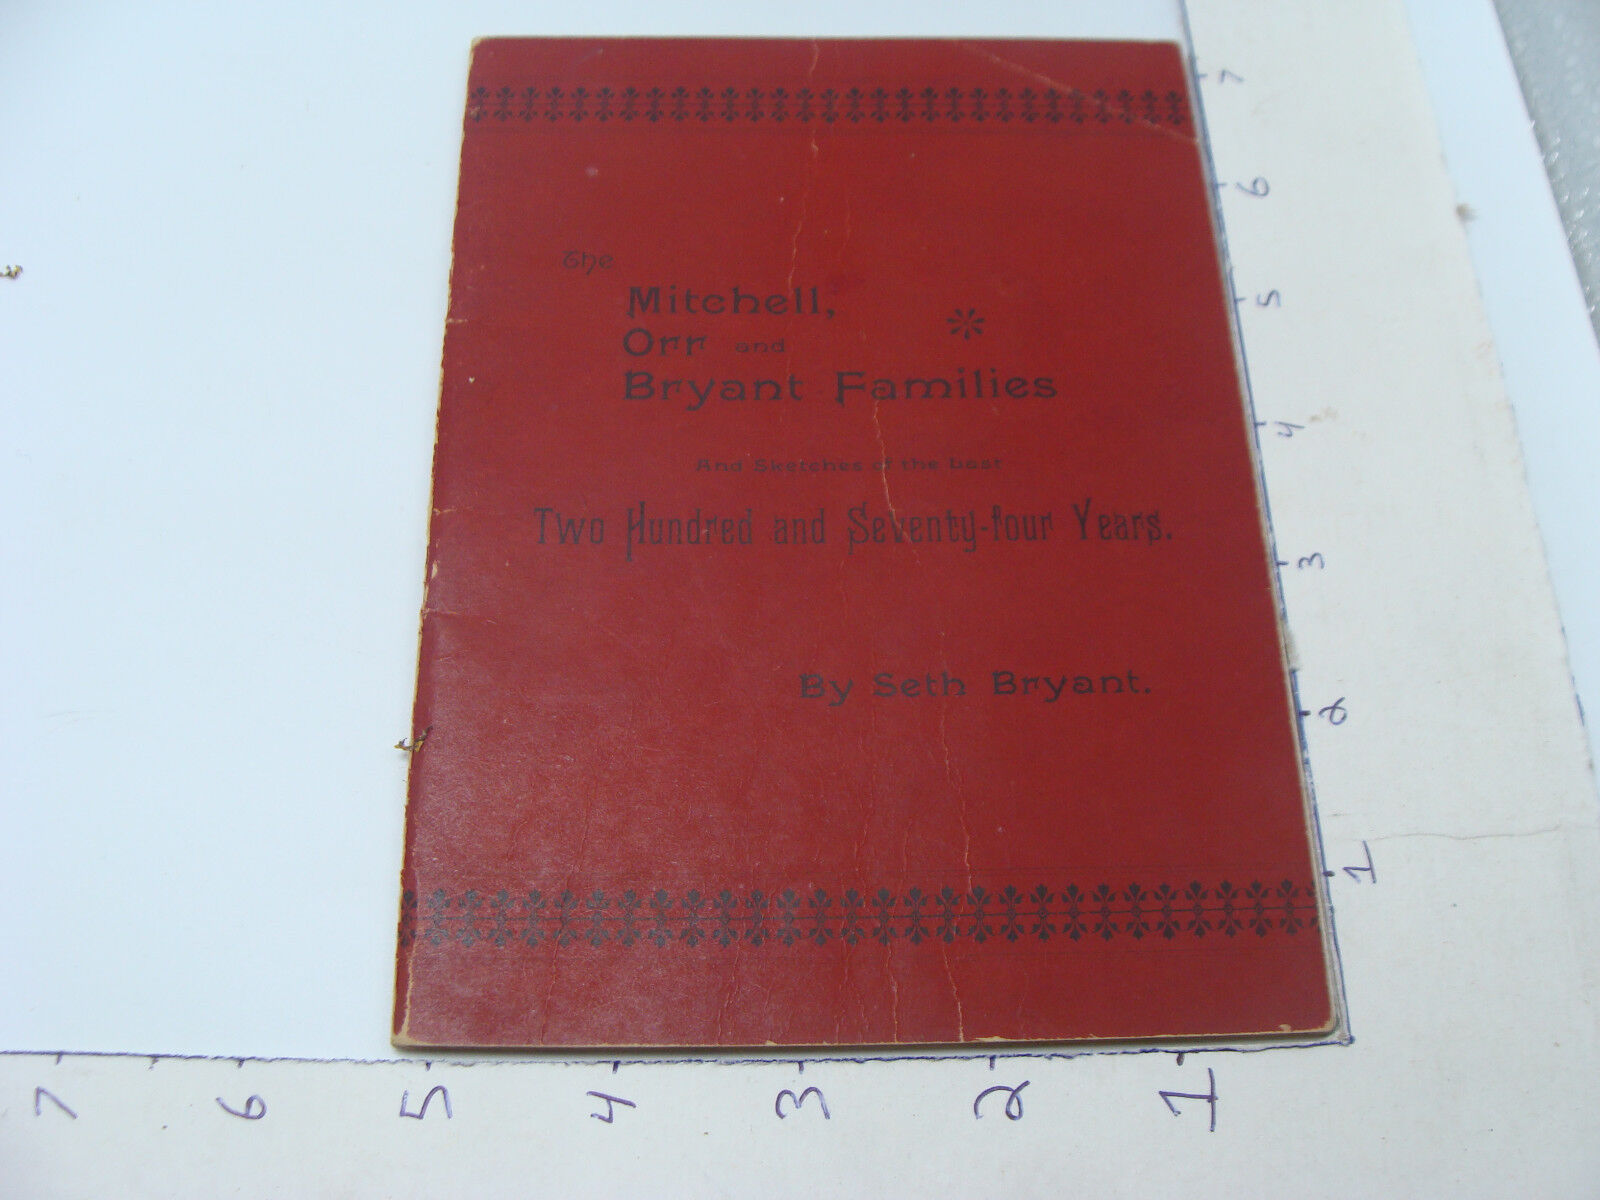 original 1894 the MITCHELL, ORR & BRYANT FAMILIES 274 years by SETH BRYANT 32pgs